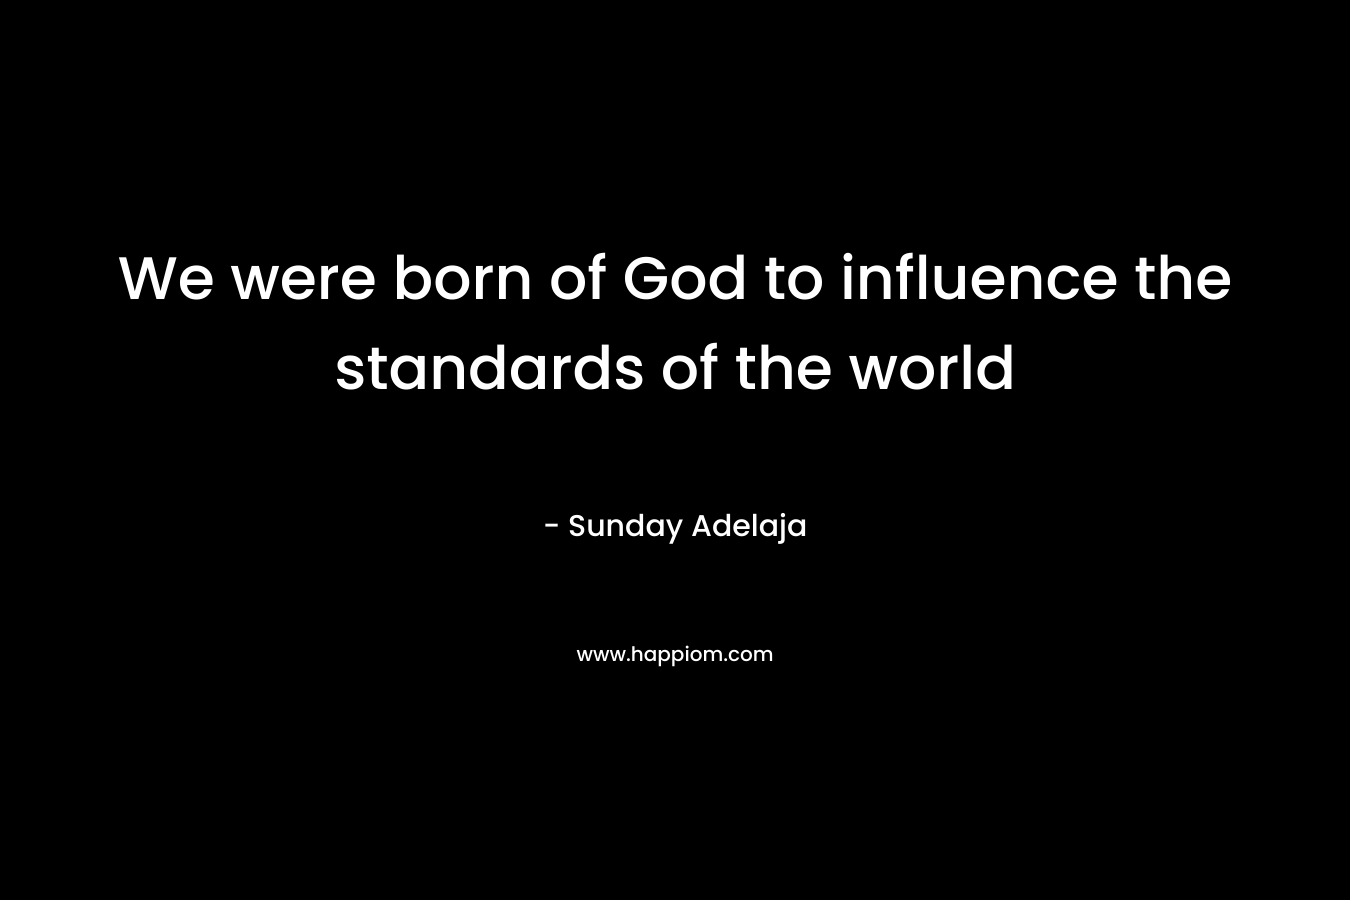 We were born of God to influence the standards of the world